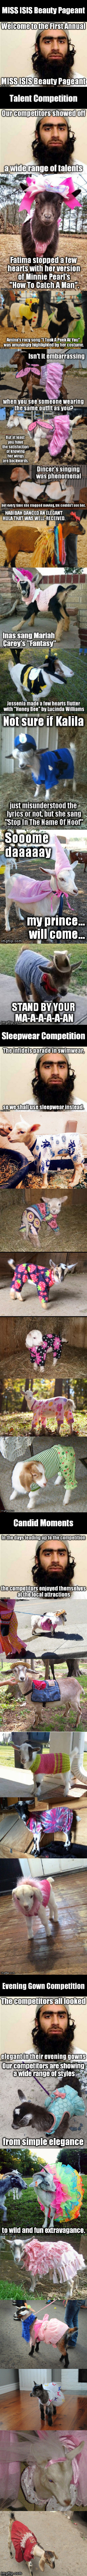 Heard on the radio that the Lenawee County Fair was having a Dress A Goat contest, and the very first thought I had was... | image tagged in meme,isis,goat,beauty,contest,competition | made w/ Imgflip meme maker